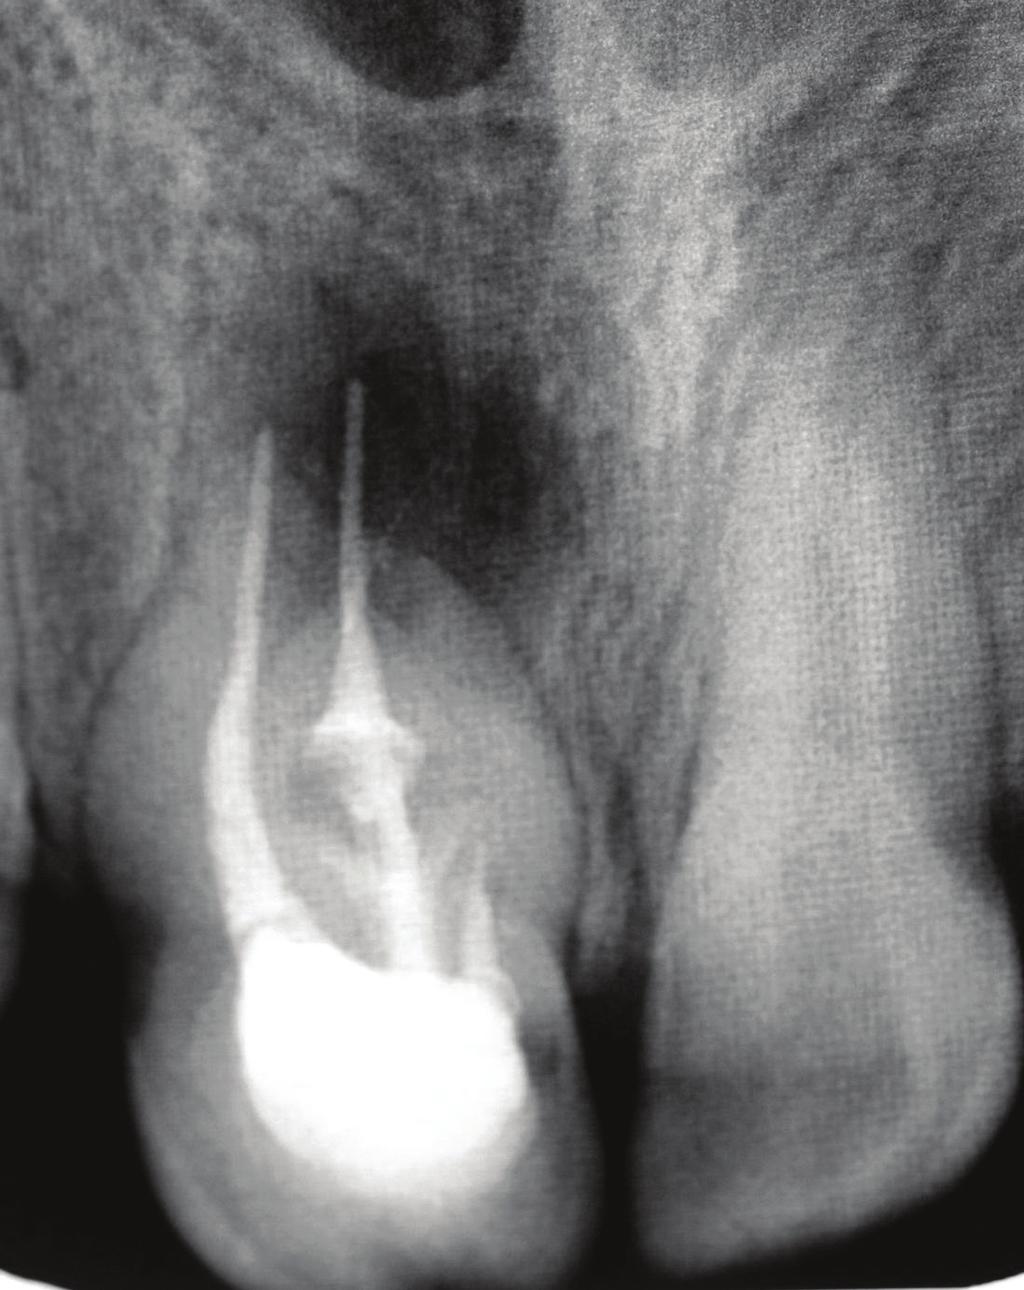 The periapical healing of the case was assessed according to the criteria used by Rud et al.8 Figure 1.